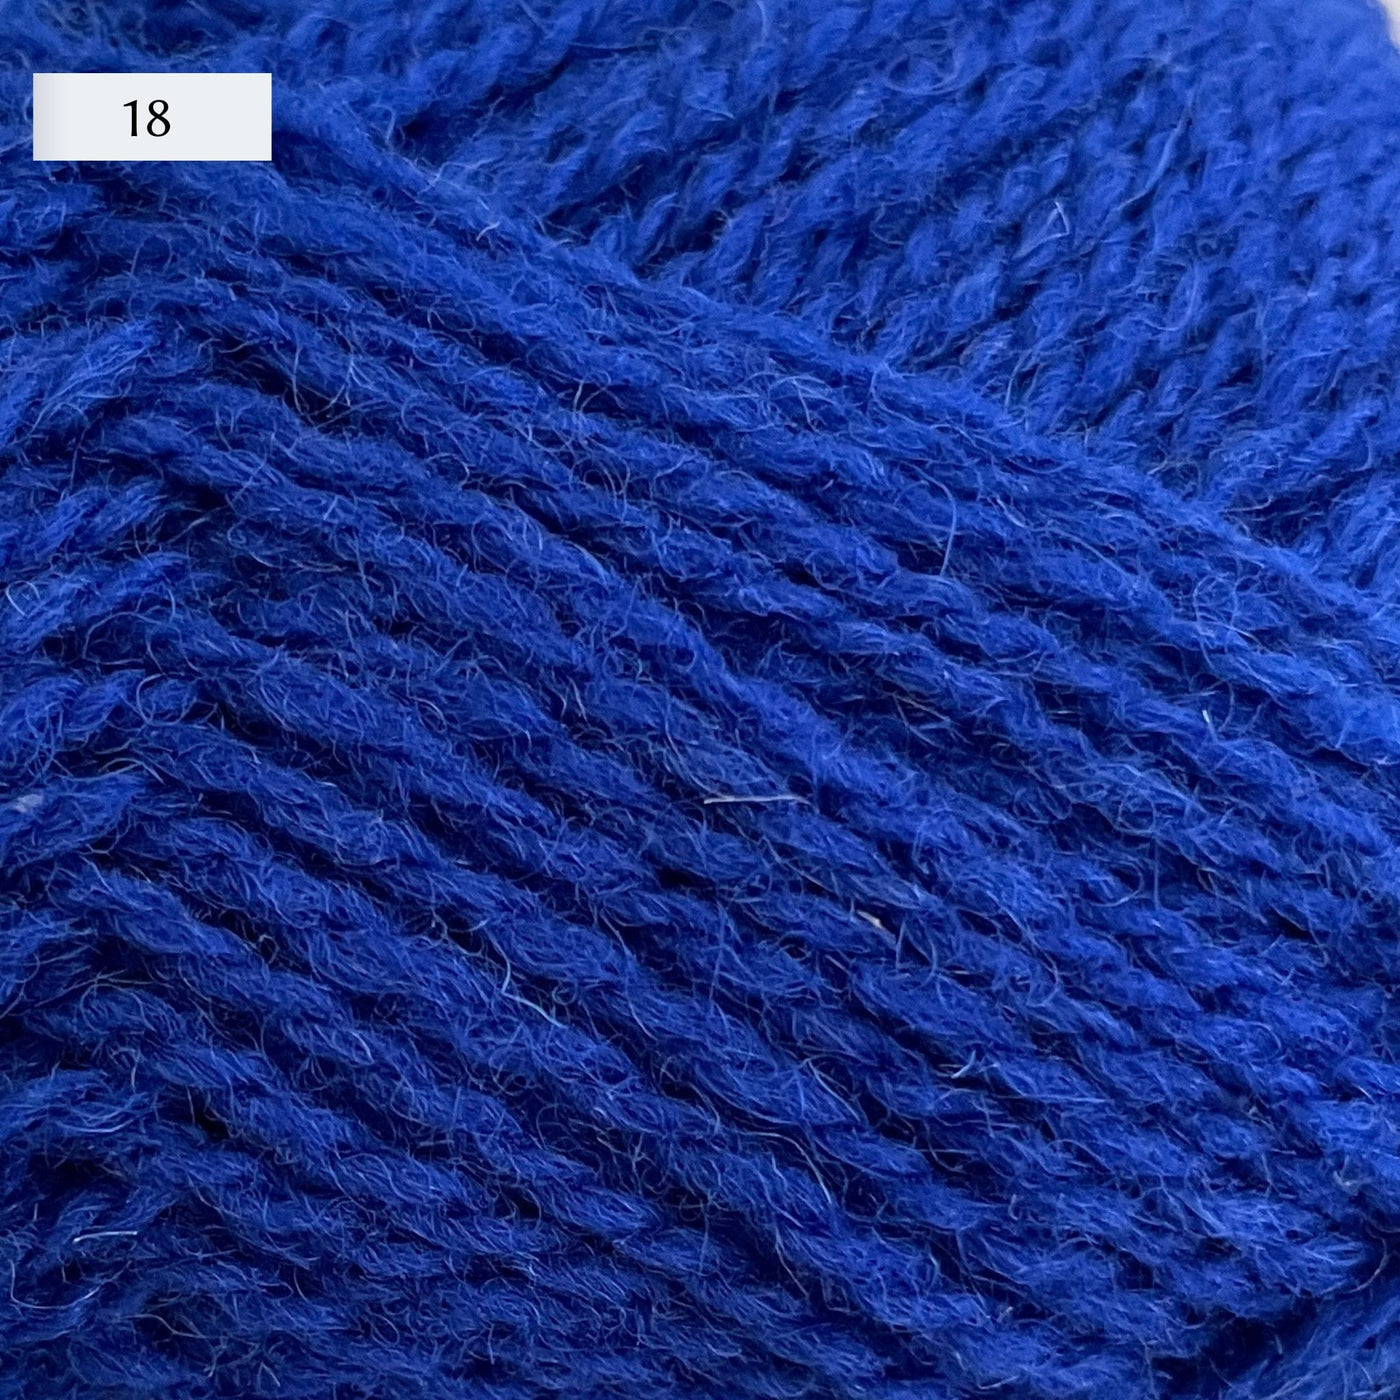 Jamieson & Smith 2ply Jumper Weight, light fingering weight yarn, in color 18, cobalt blue